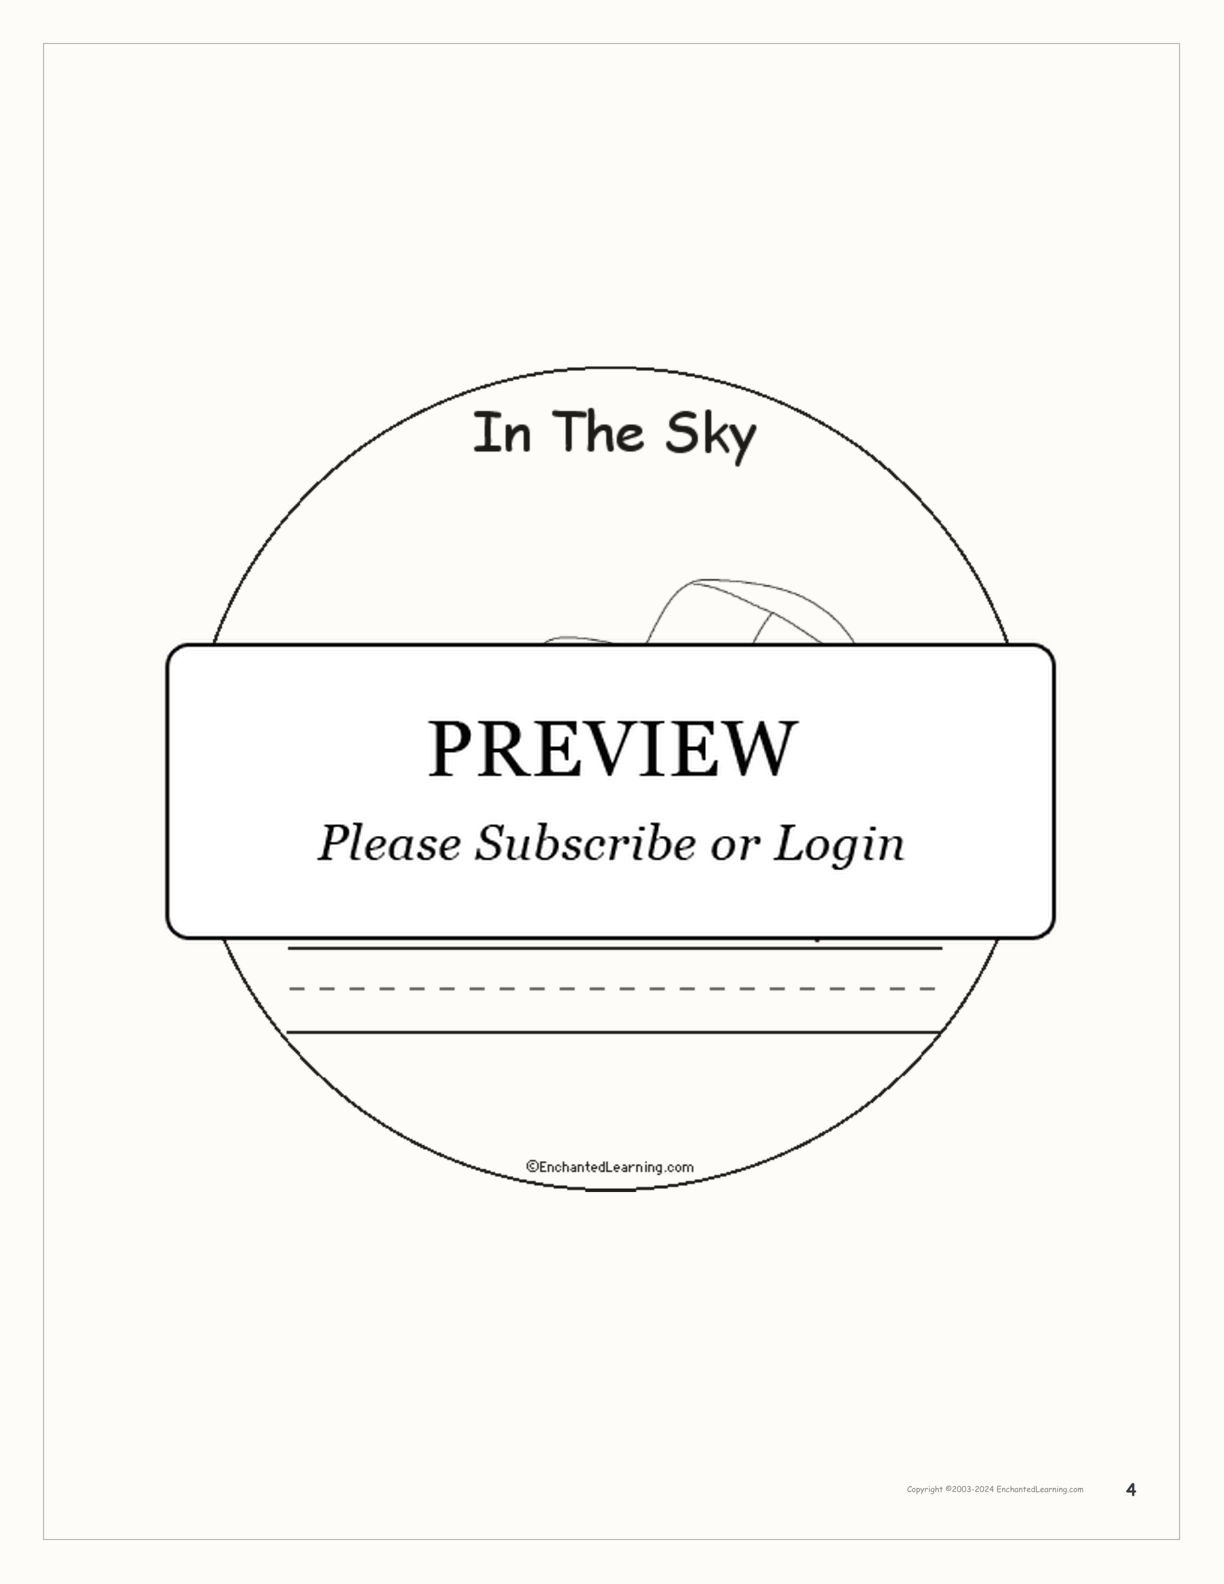 'In The Sky' Book interactive printout page 4